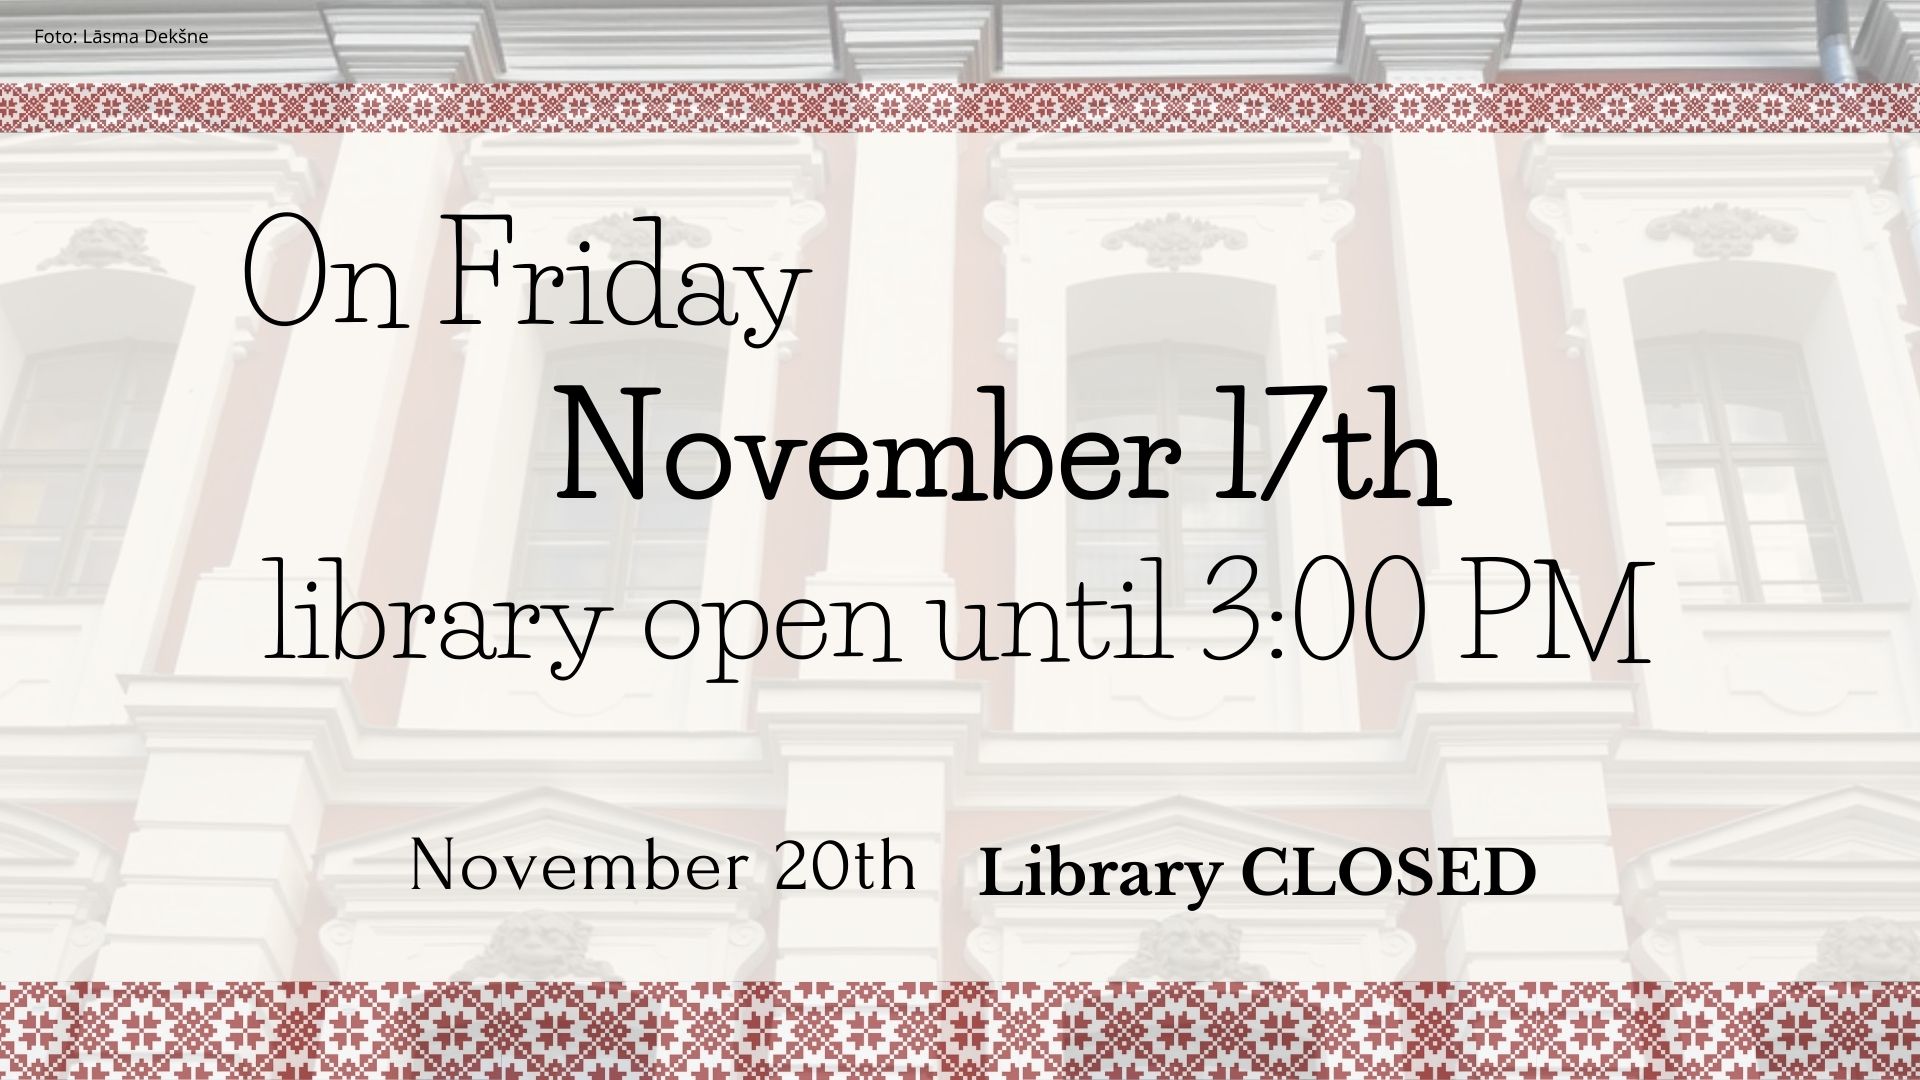 Library working hours. November 17th - until 3PM. November 20th - closed.